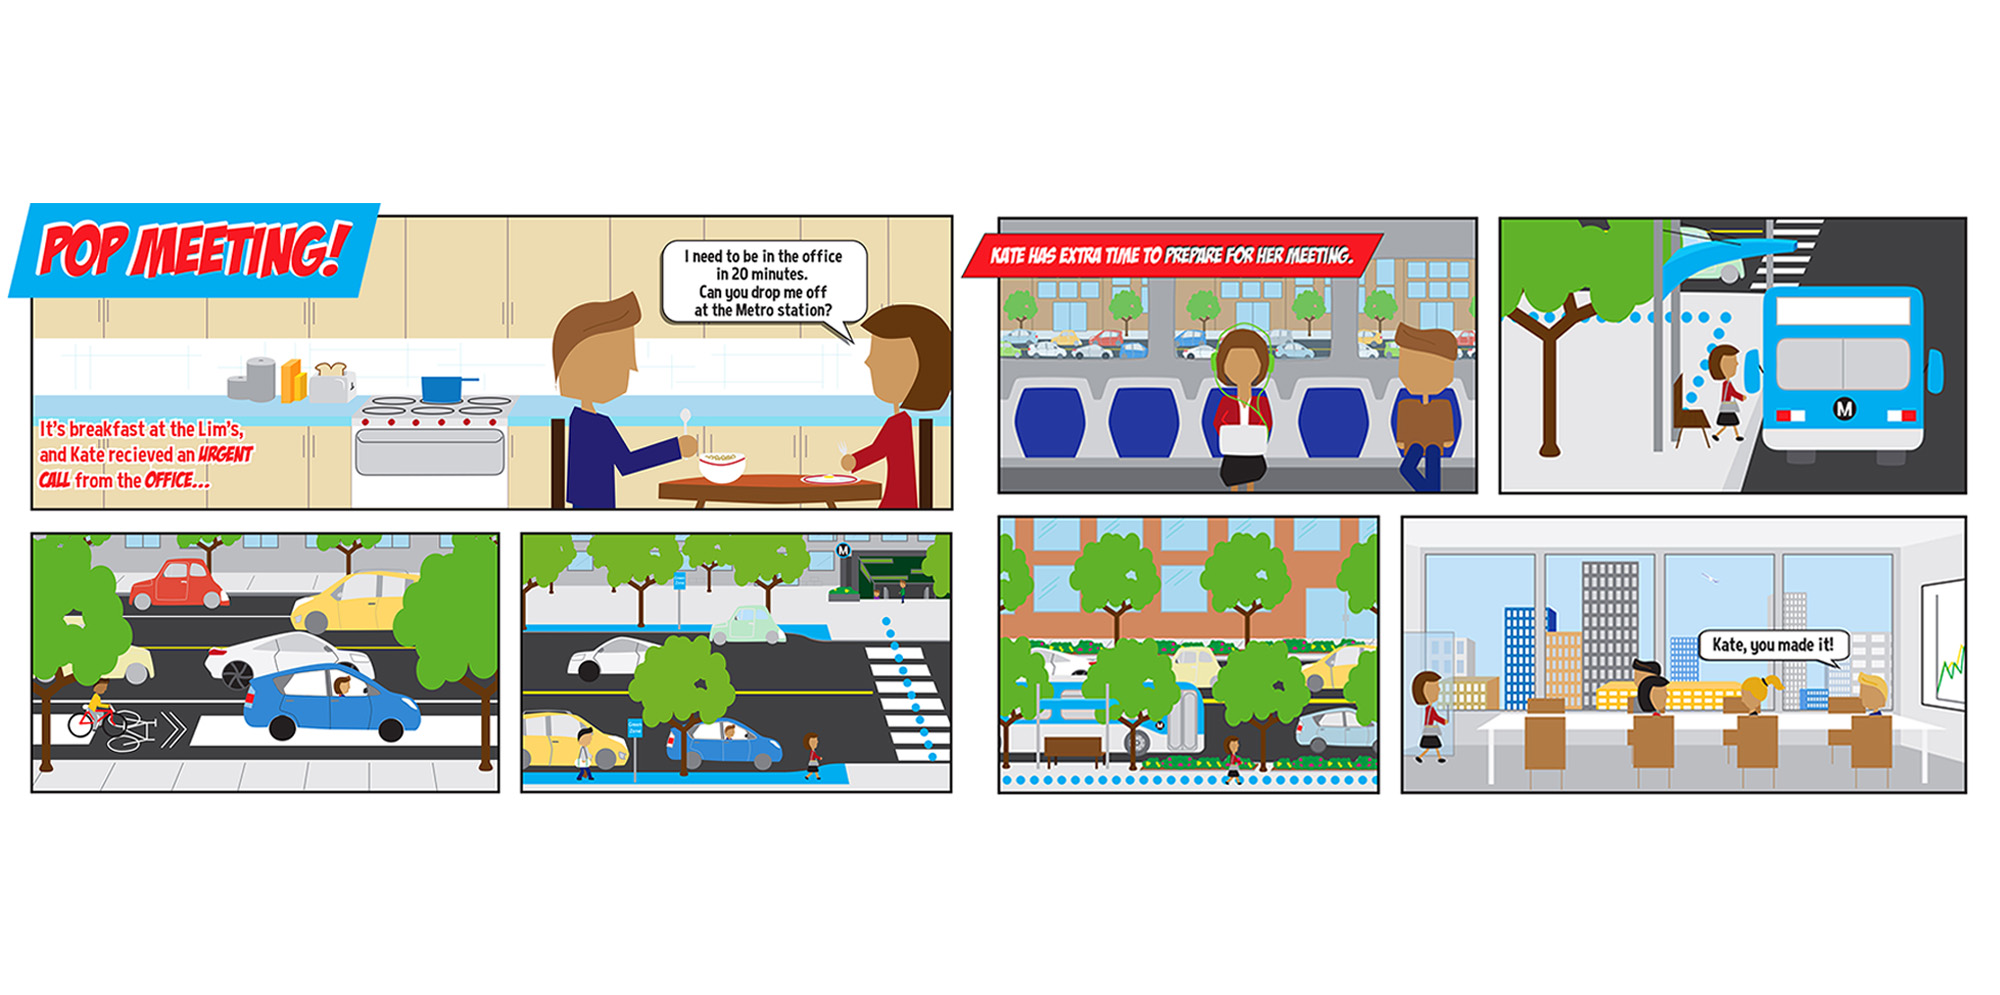 First Last Mile Comic strip showing benefits of First Last Mile station. For full text please download our project PDF below